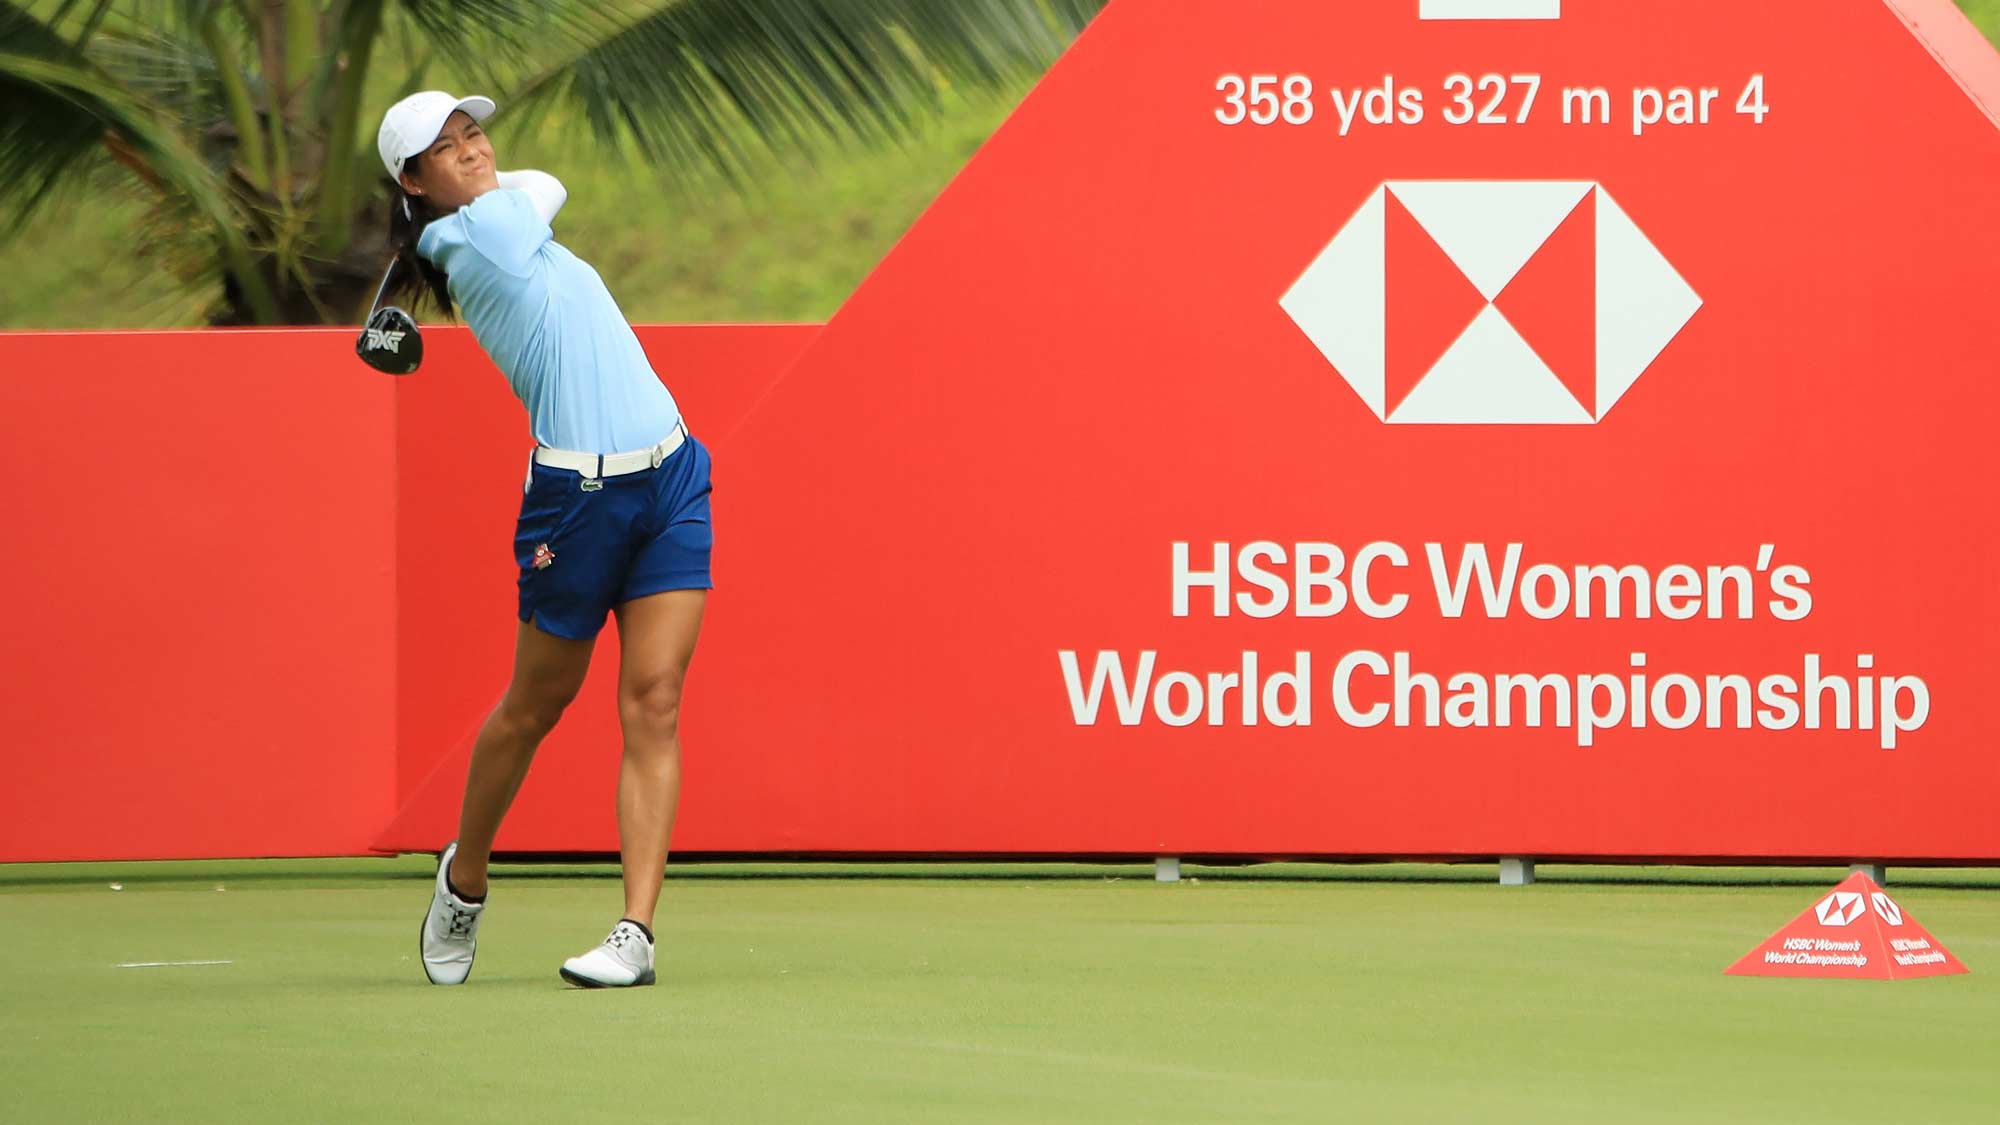  Celine Boutier of France plays her shot from the second tee during the first round of the HSBC Women's World Championship at Sentosa Golf Club on February 28, 2019 in Singapore.